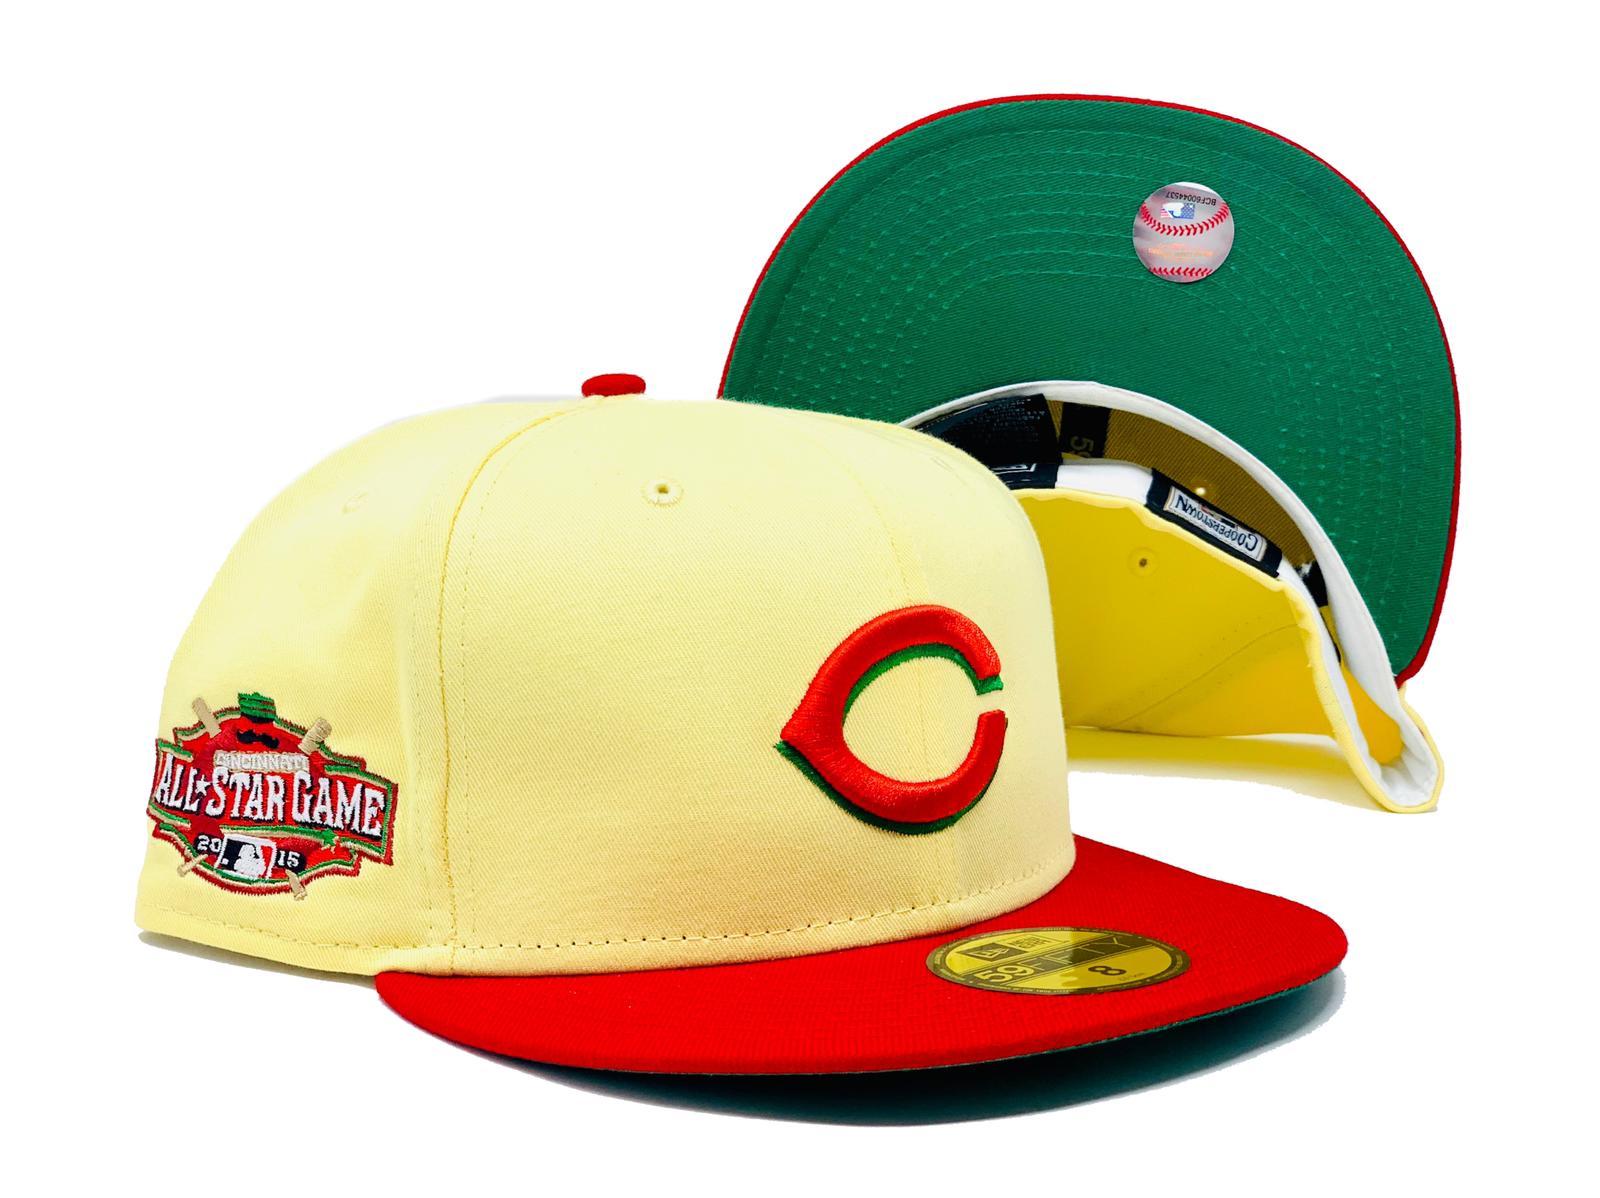 Cincinnati Reds - Here's the official 2015 All-Star Game cap for your Reds.  Now it's up to you how many players will get to wear it. VOTE REDS:  reds.com/vote